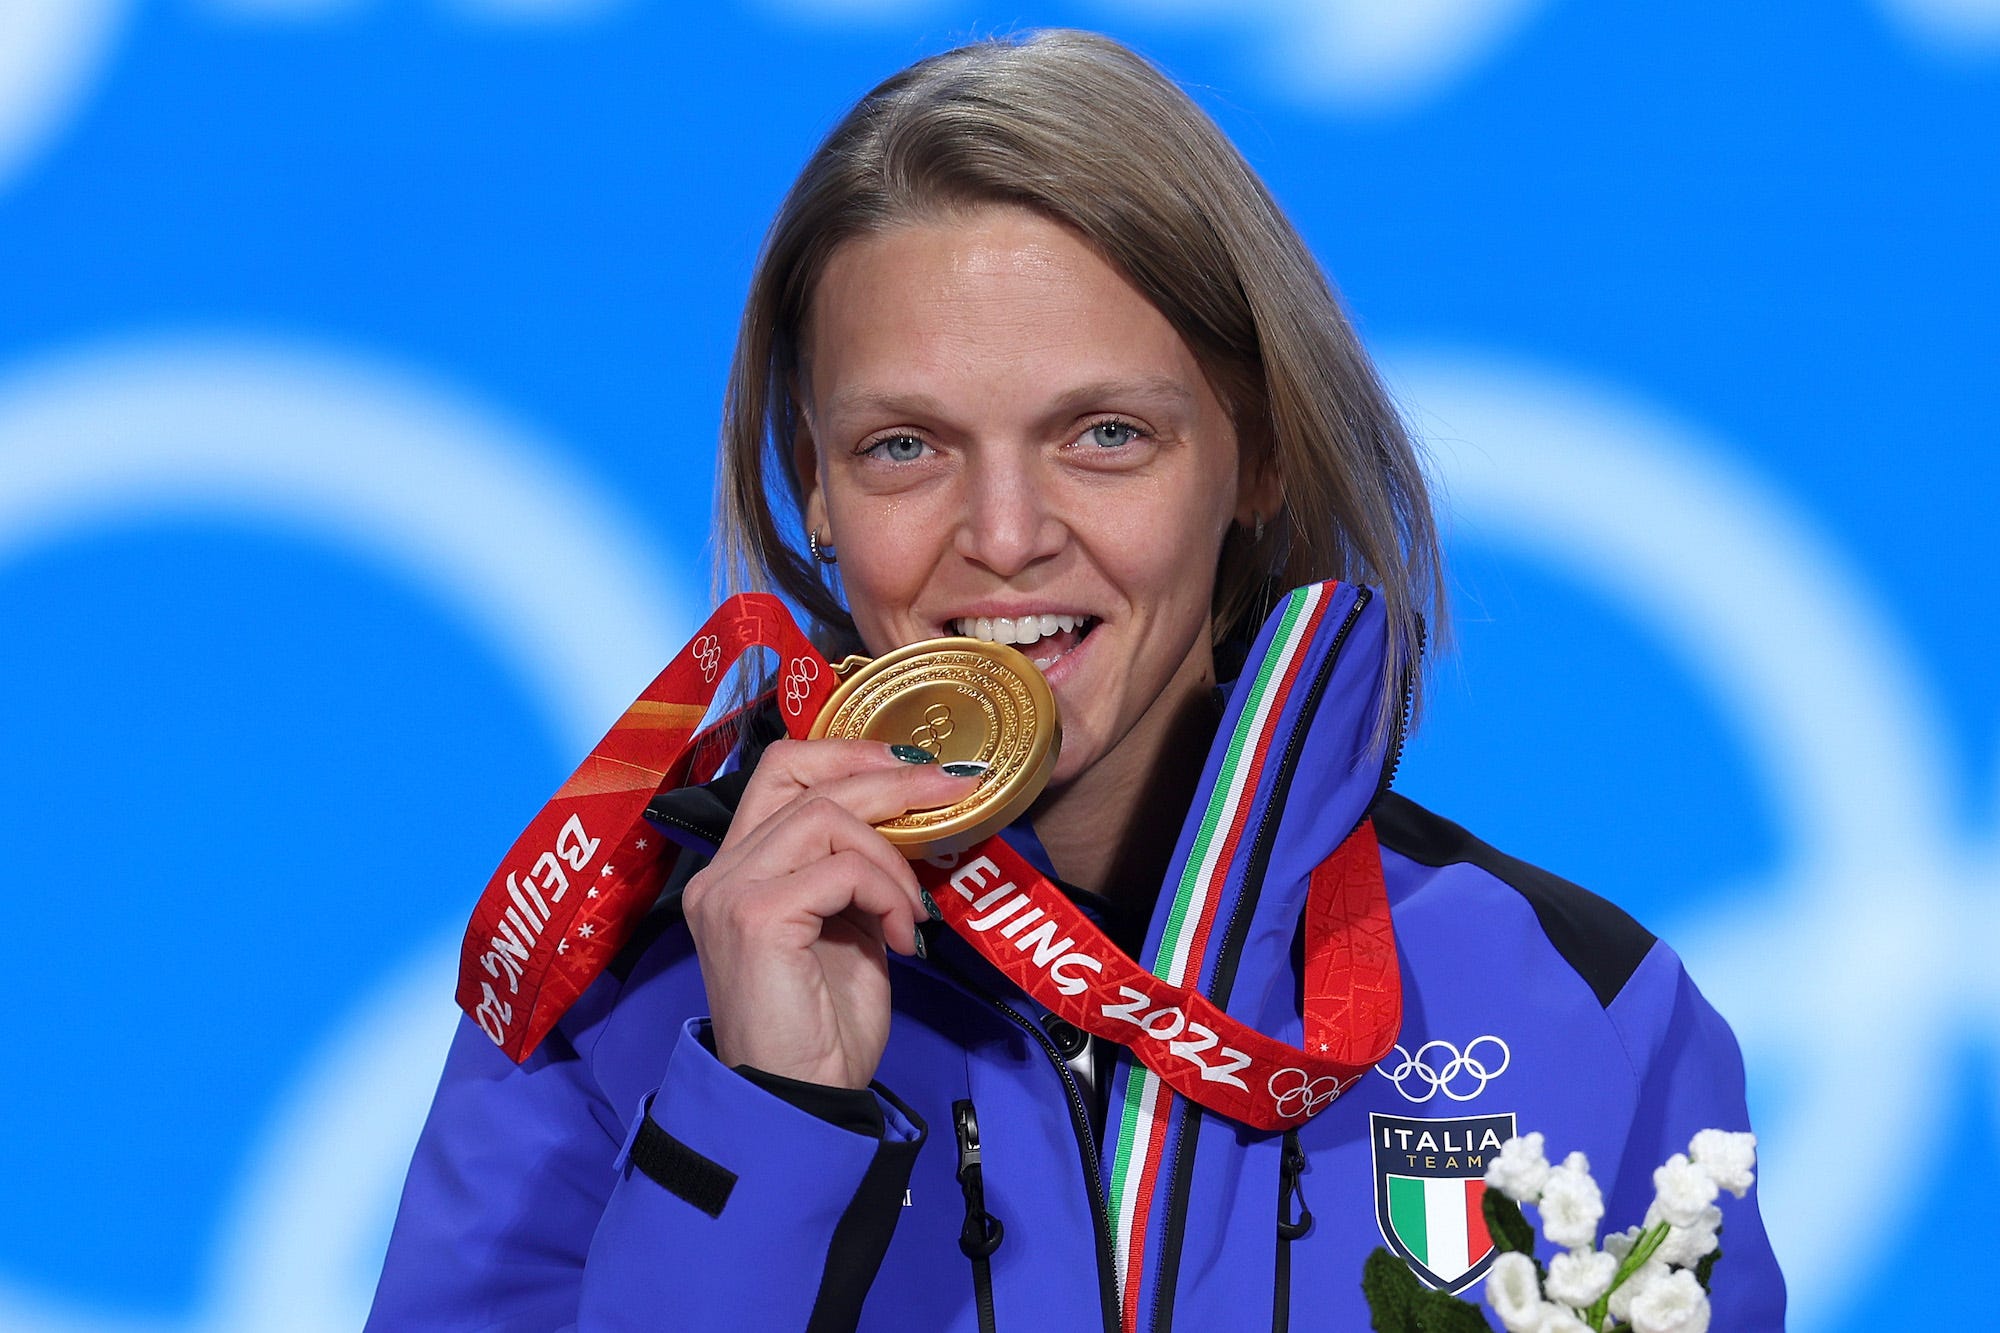 Gold medallist Arianna Fontana of Team Italy poses with their medal during the Women's 500m Speed Skating medal ceremony on Day 4 of the Beijing 2022 Winter Olympic Games at Beijing Medal Plaza